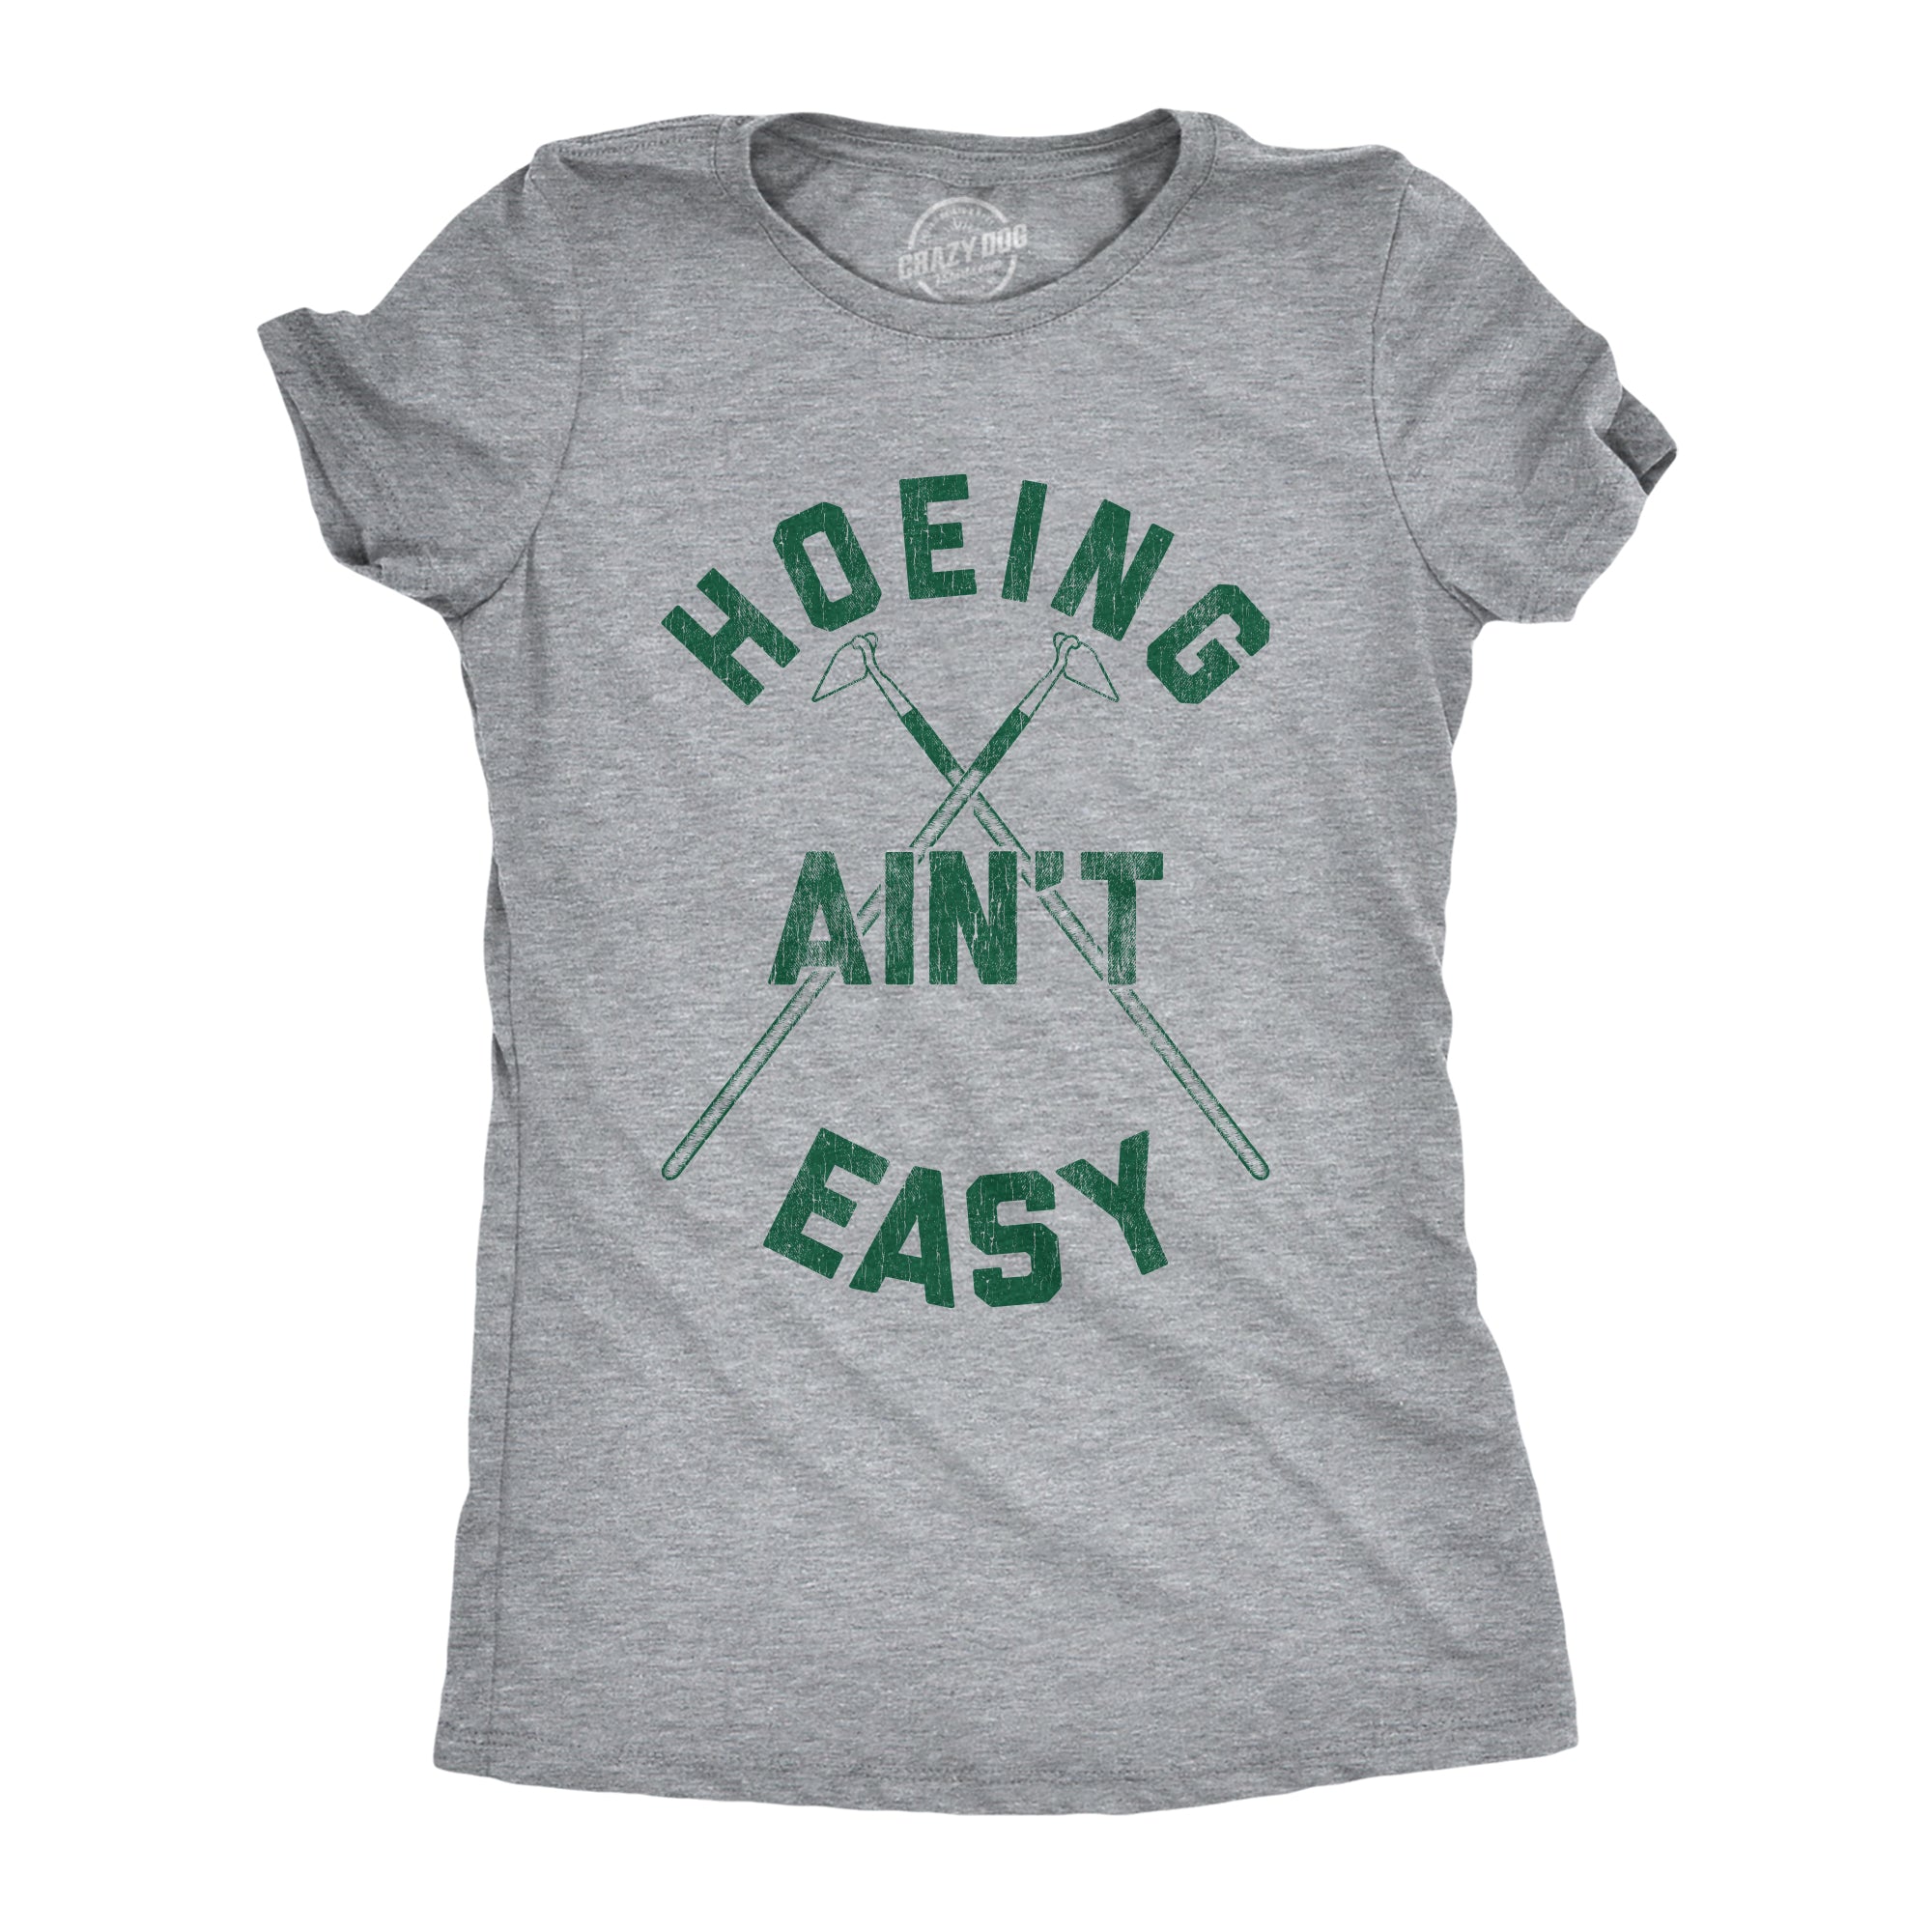 Funny Light Heather Grey - Hoeing Hoeing Ain't Easy Womens T Shirt Nerdy Earth Tee